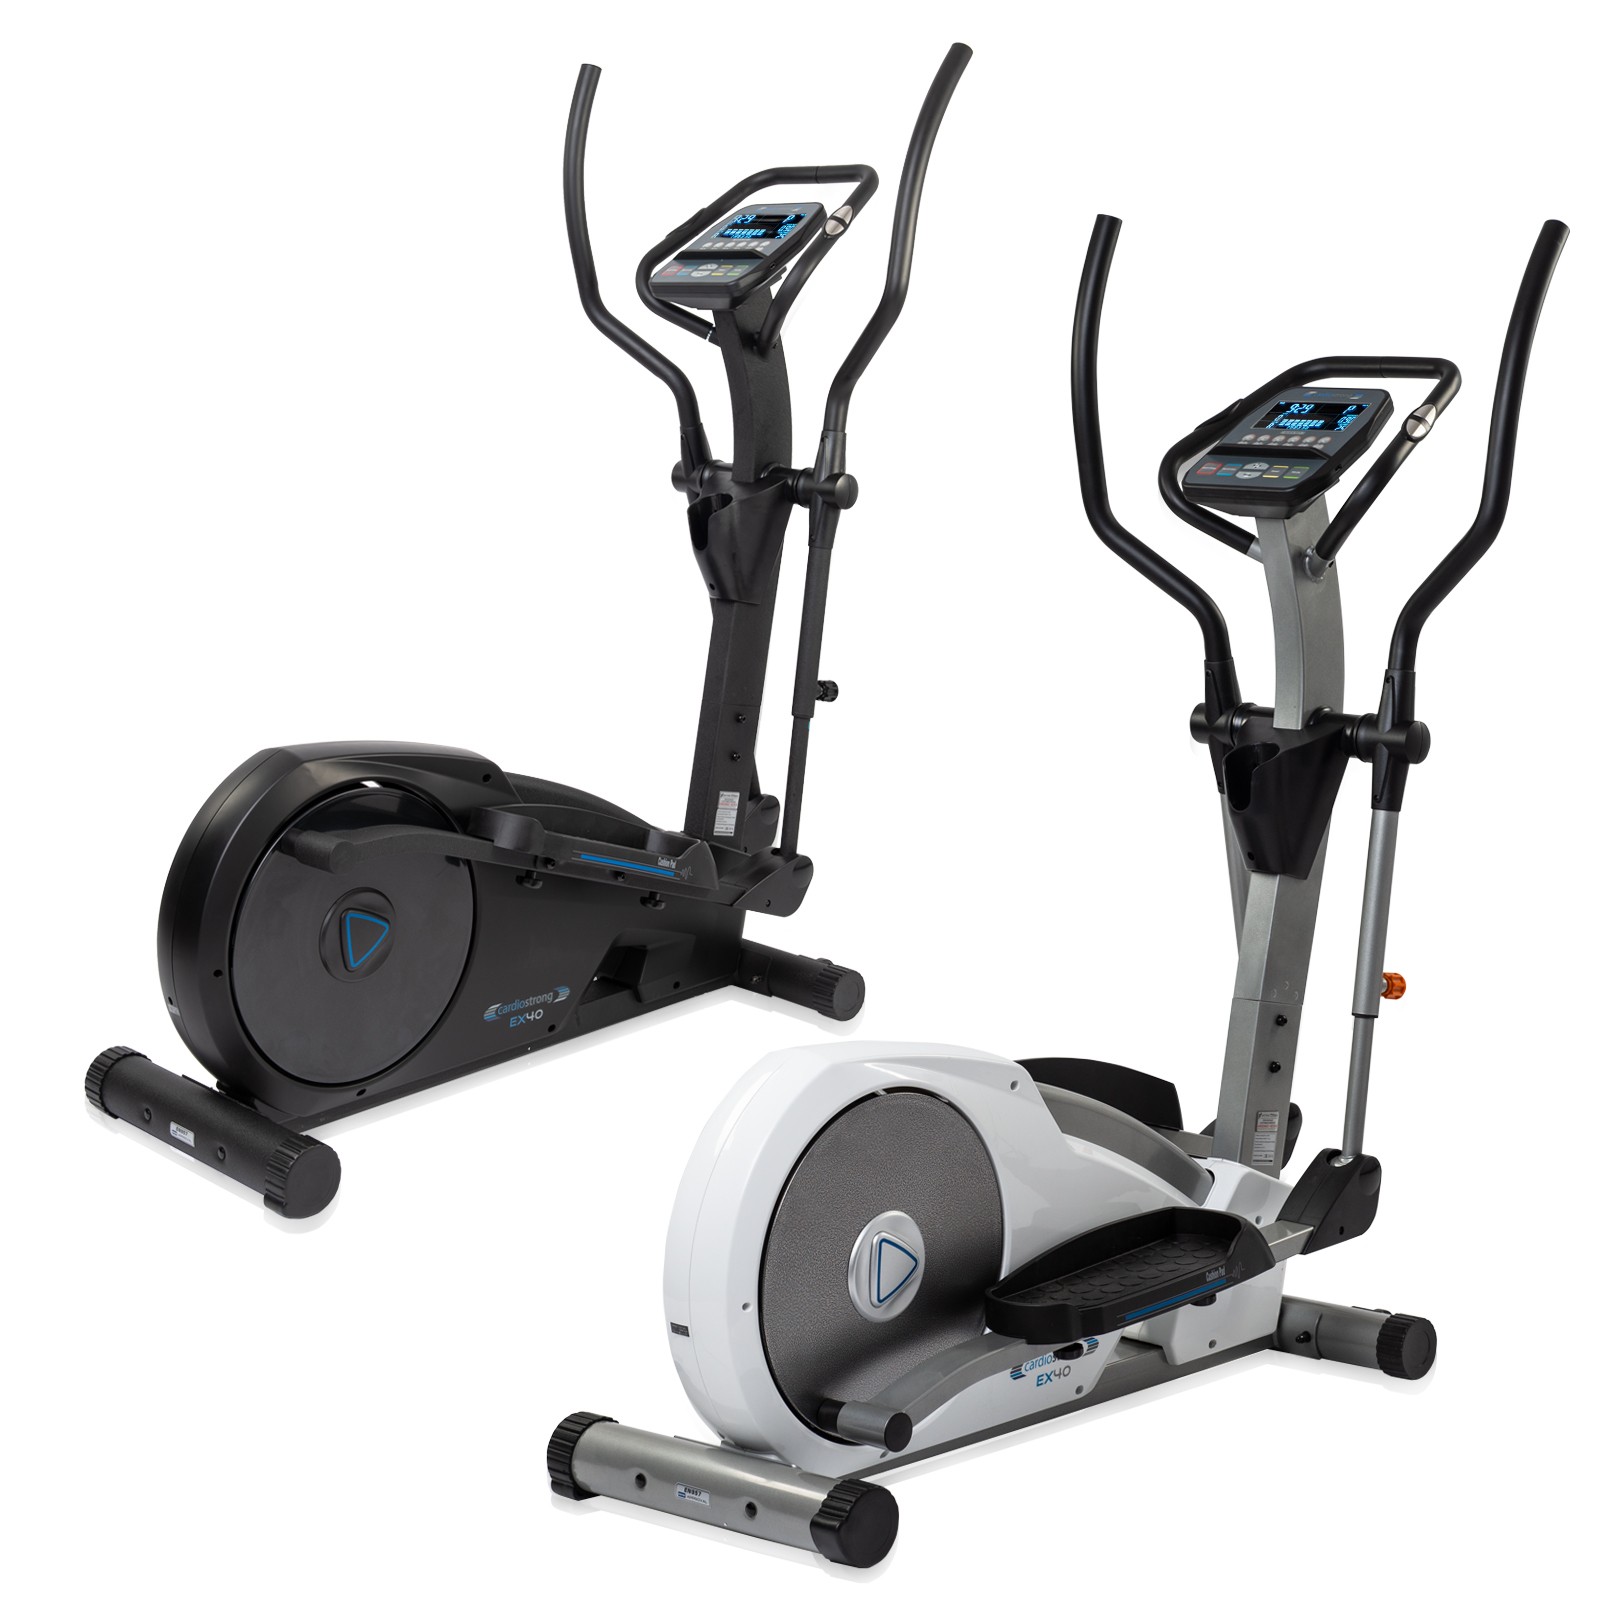 Auroch Mos inhalen cardiostrong Elliptical Cross Trainer EX40 buy with 20 customer ratings -  cardiostrong